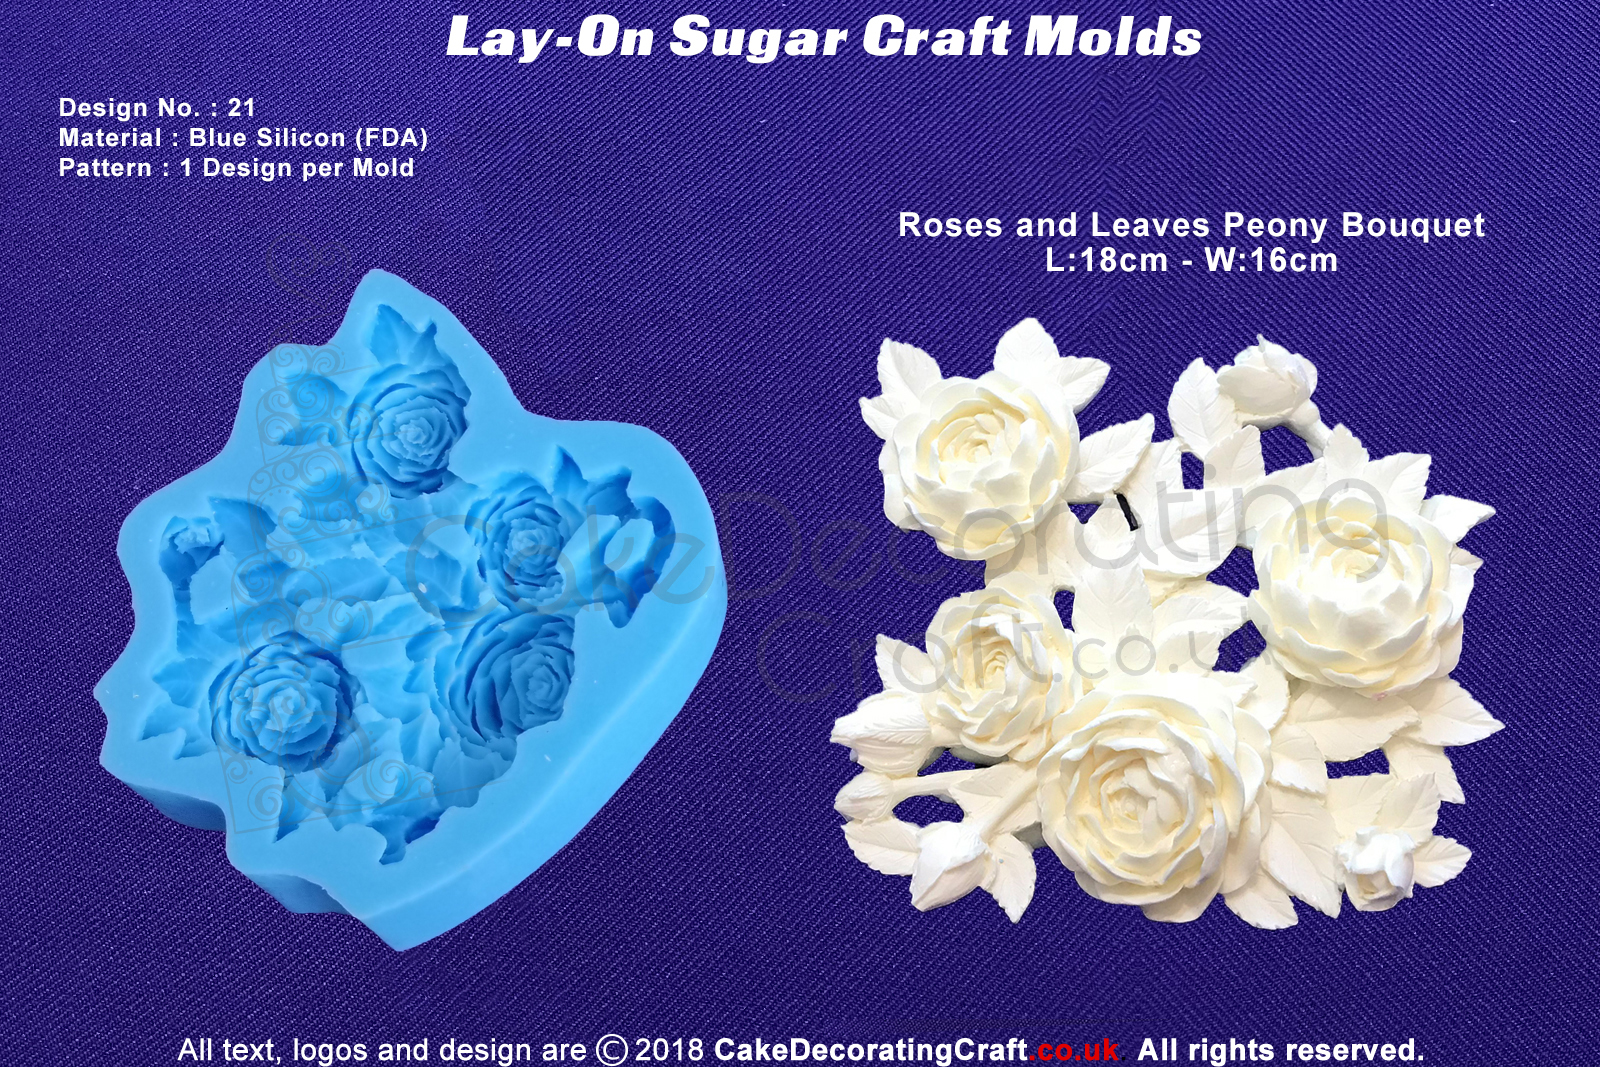 Design 21 | Lay-On Silicone Cake Molds | Deep Floral Roses | Wedding Cakes | Design | Sugar Cake Decorating Craft 